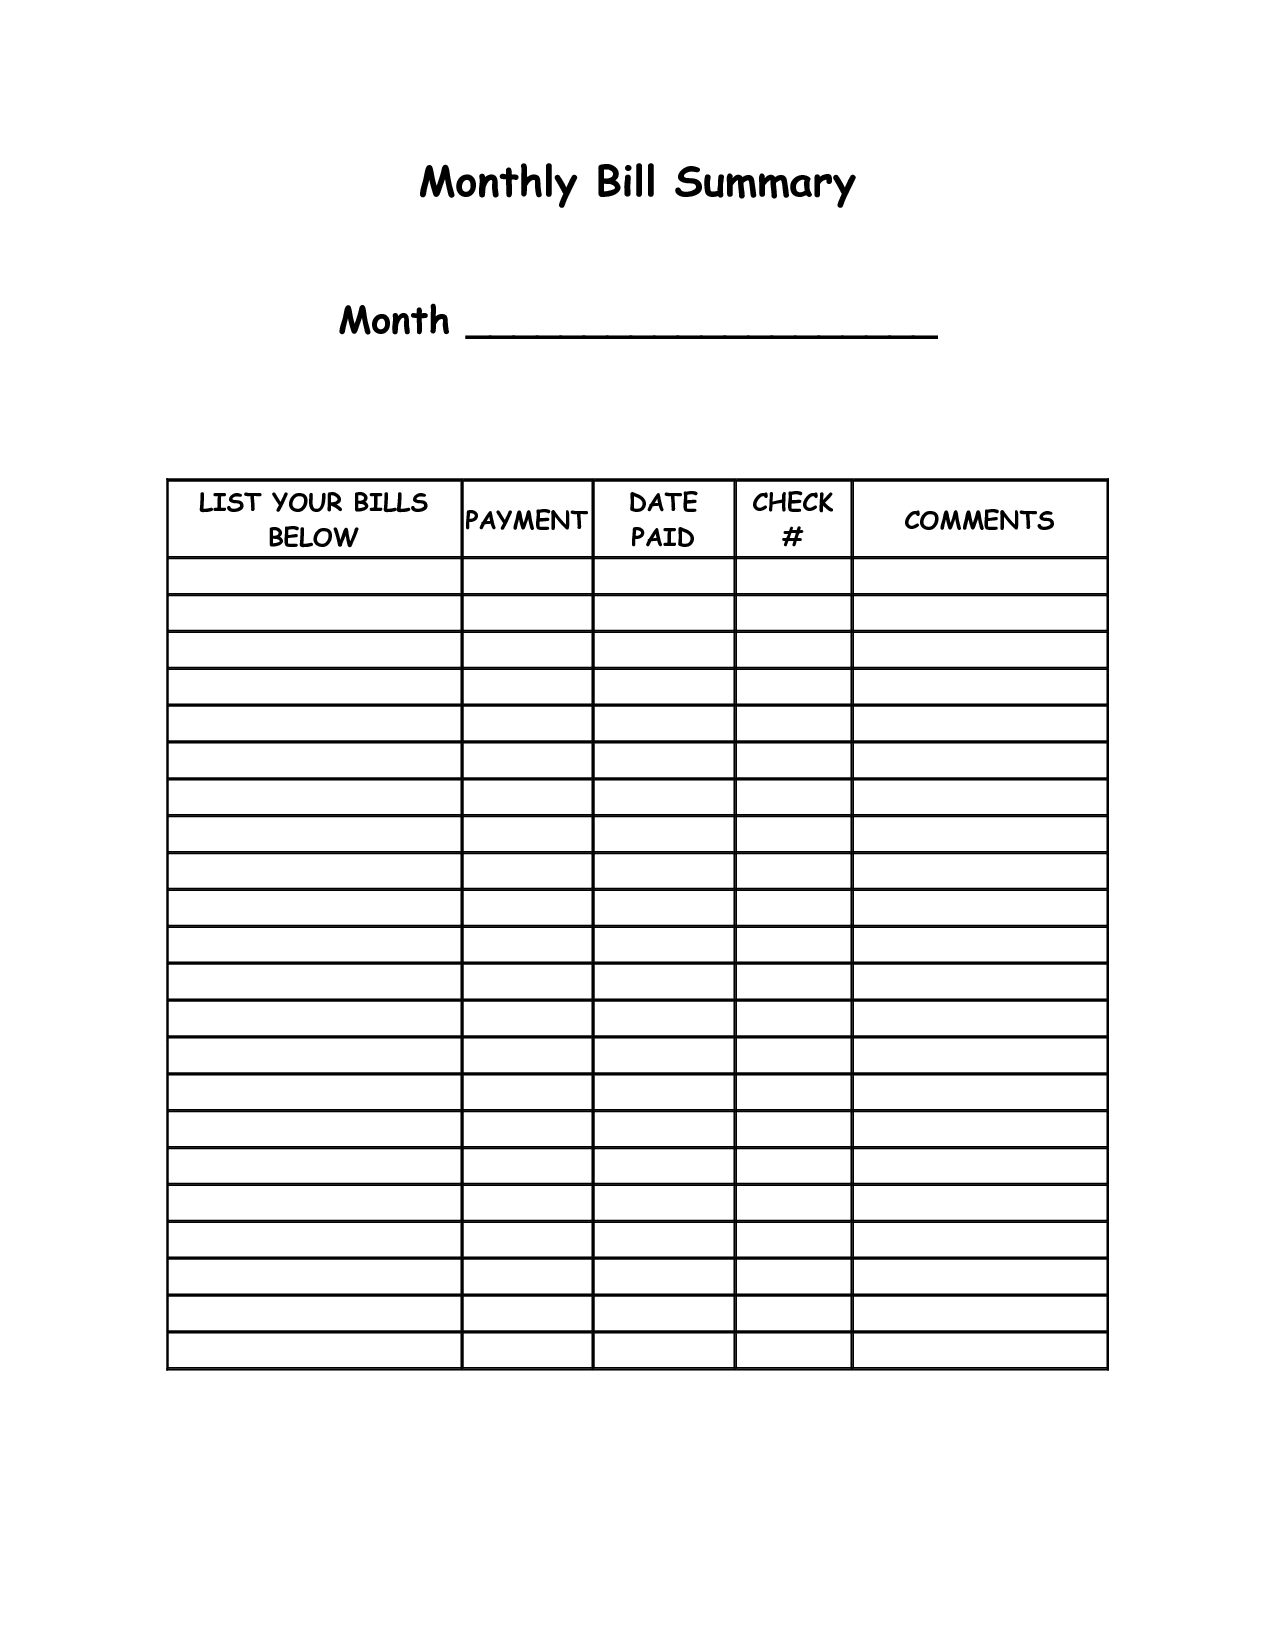 Blank Bill Payment Organizer | Monthly Bill Summary - Doc | Cats  Monthly Bills Template With Account Number And Address